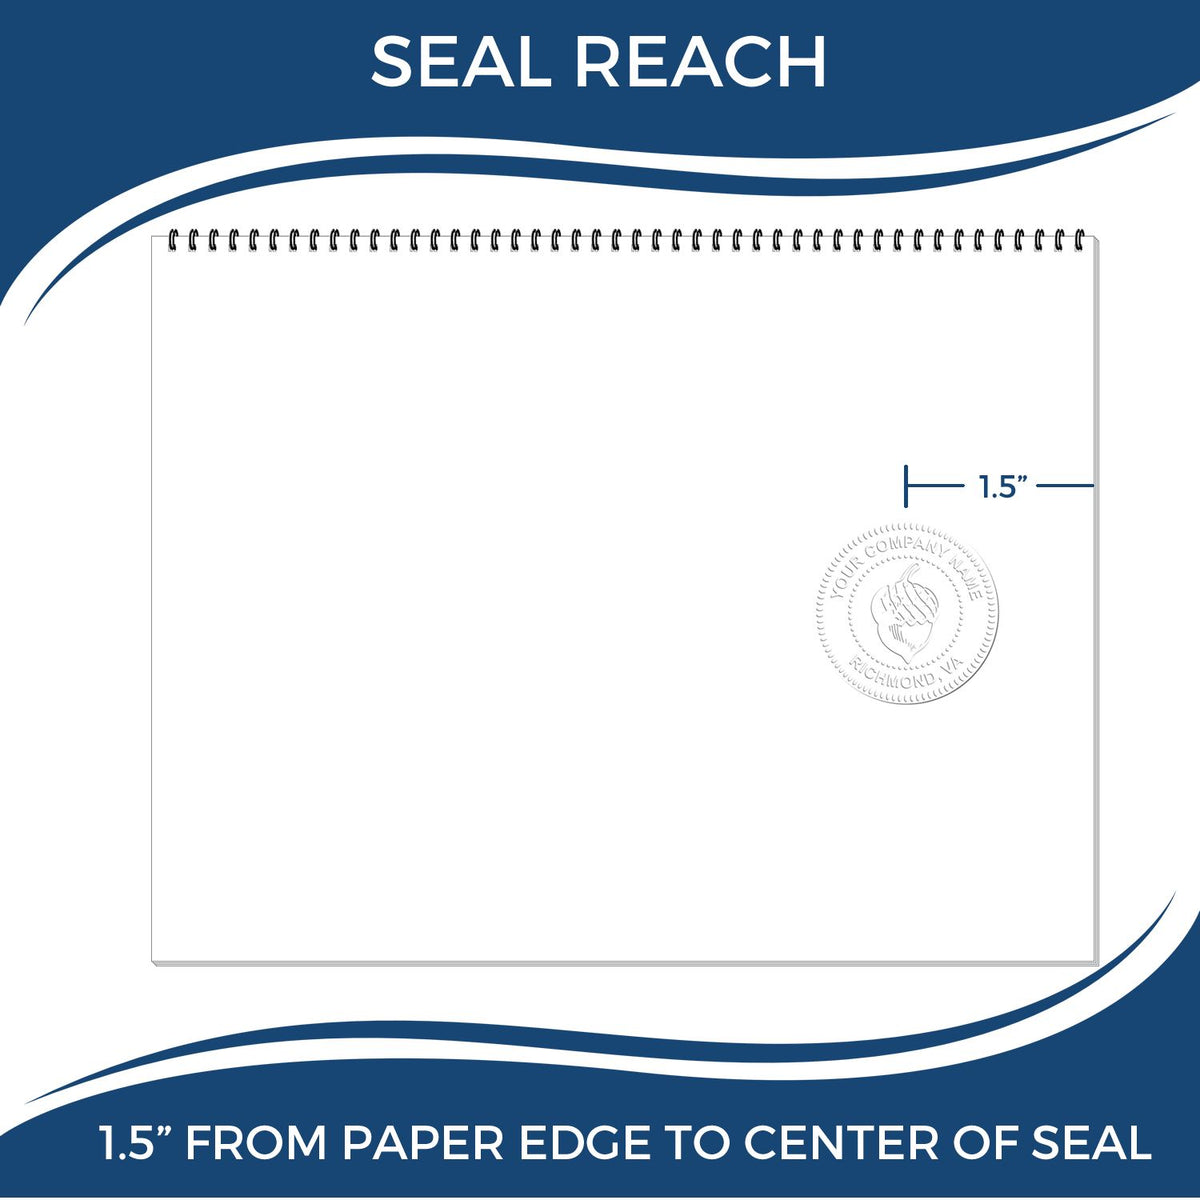 An infographic showing the seal reach which is represented by a ruler and a miniature seal image of the Handheld Minnesota Professional Engineer Embosser